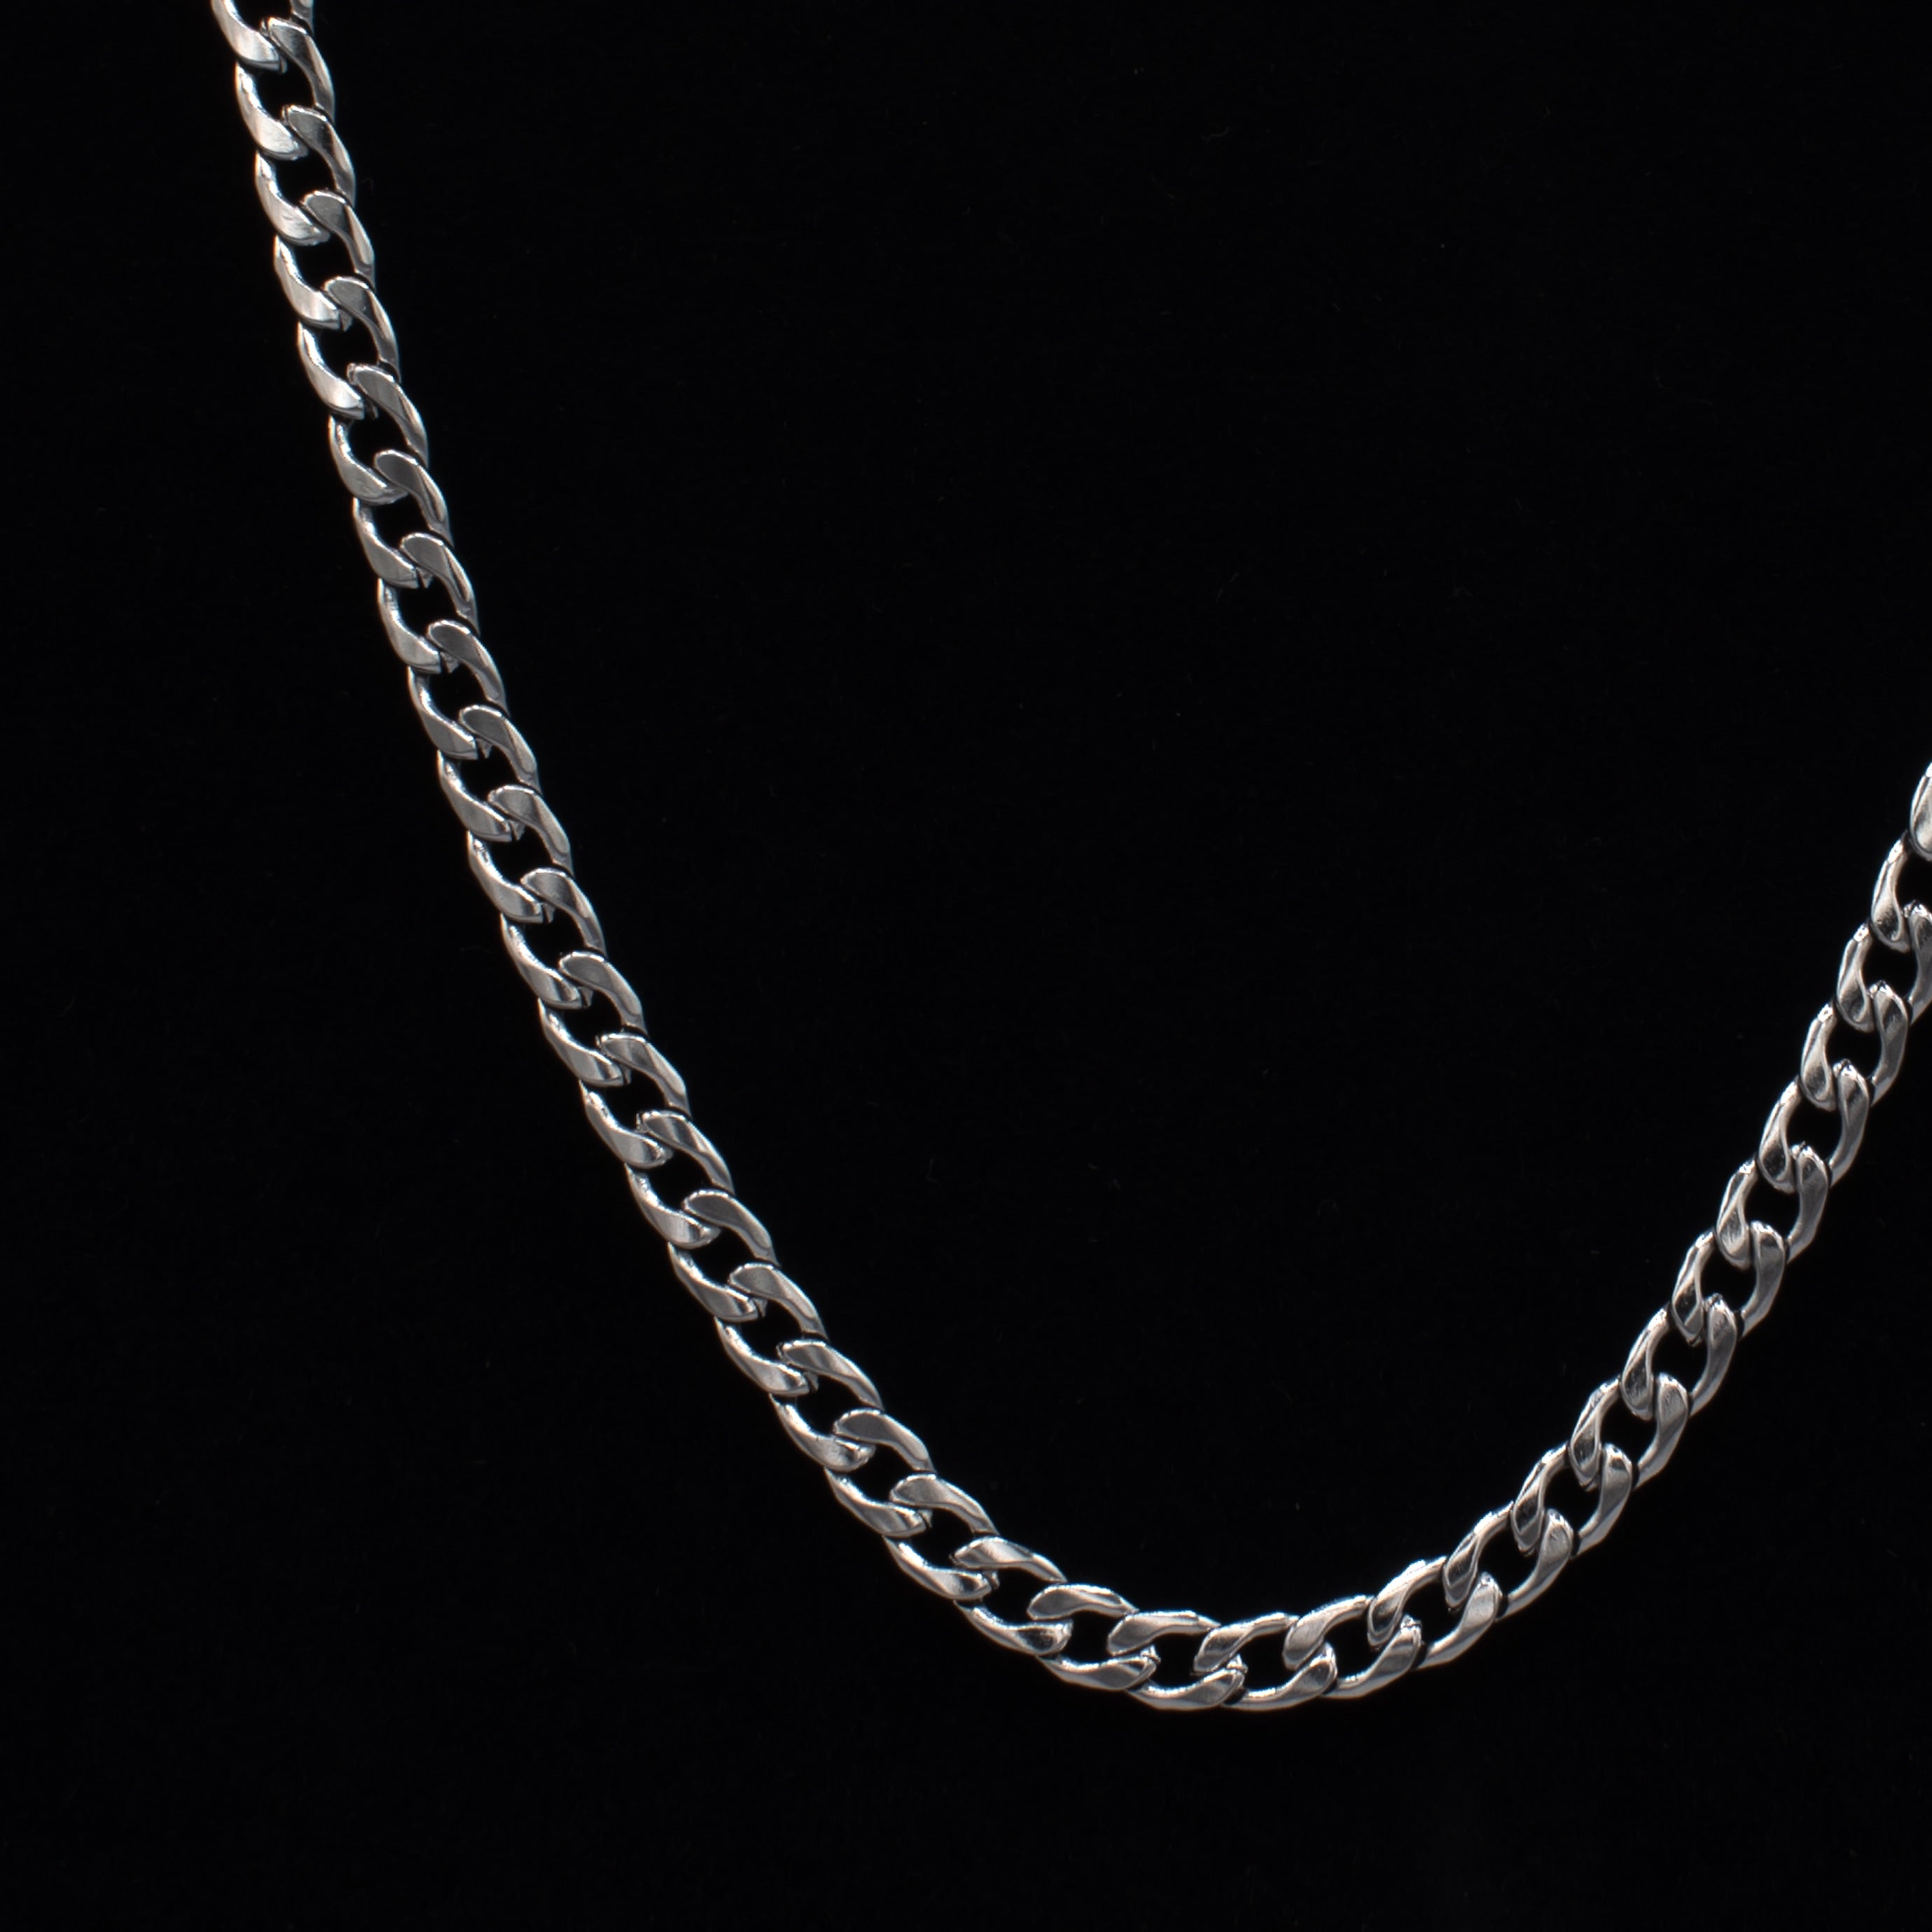 5mm stainless steel necklace available in a choice of lengths 